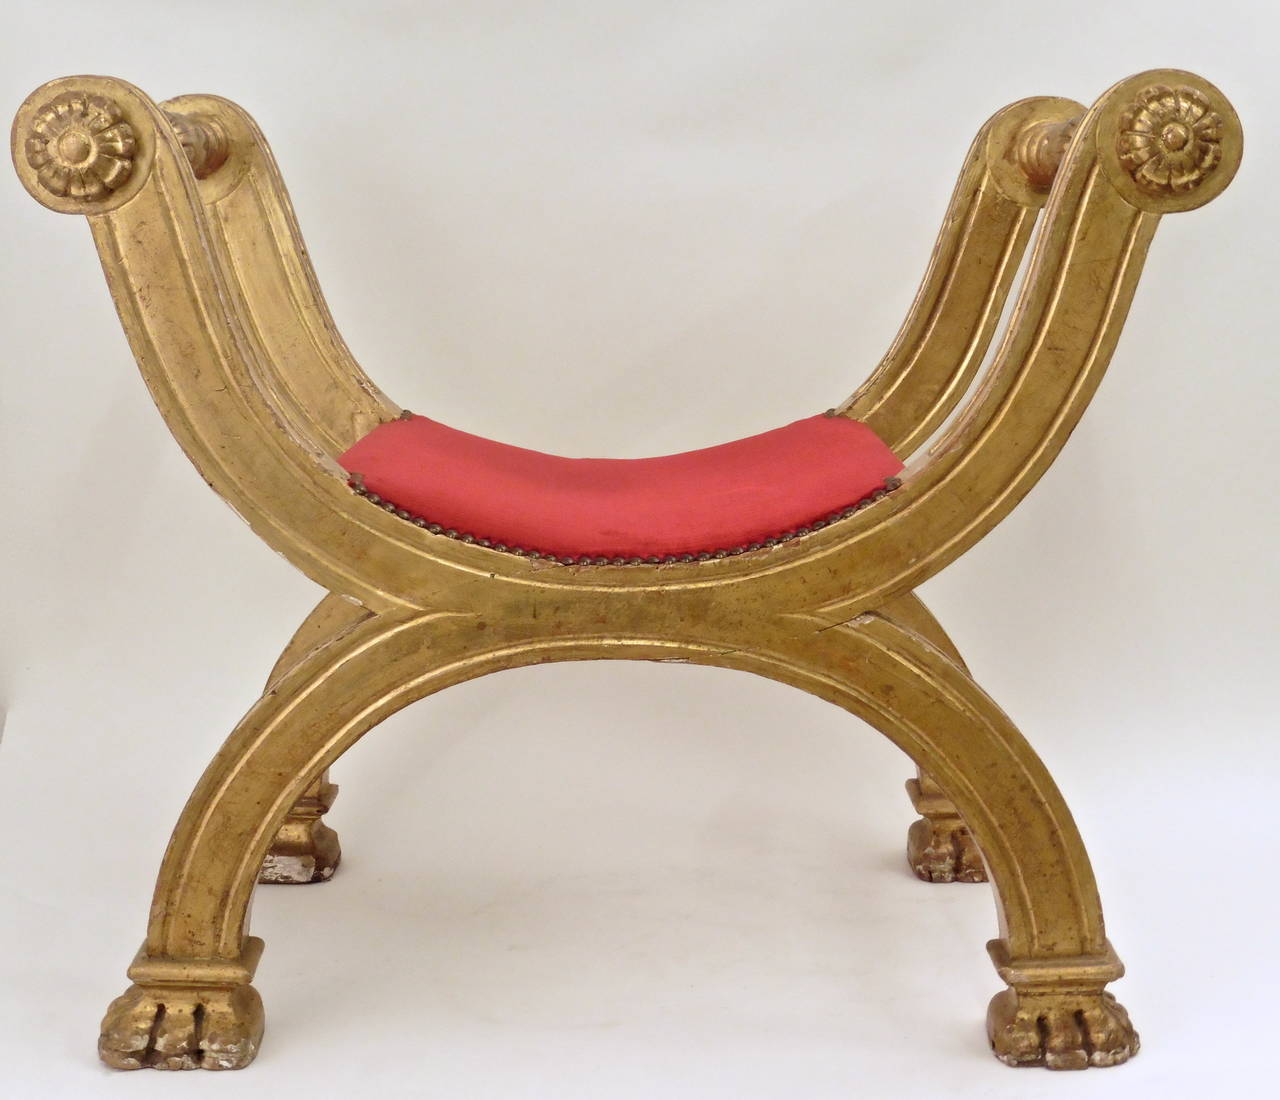 Pair of Roman giltwood X-frame stools, Italy, circa 1820. 

The legs terminate with paw feet and the armrests have foliate decor. The seats are upholstered in red velvet.